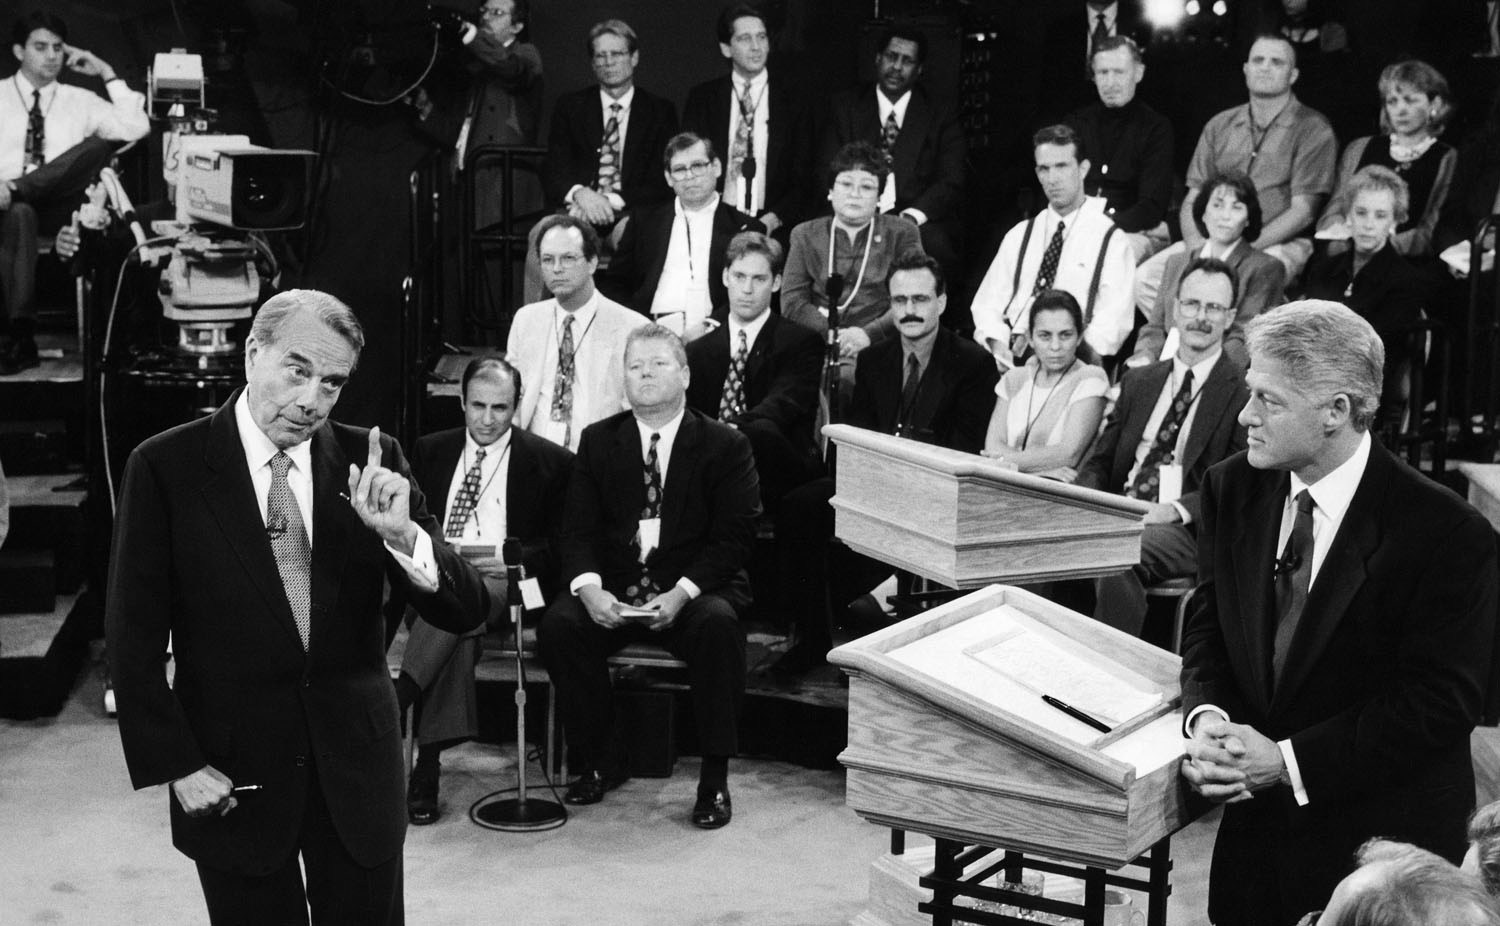 President Bill Clinton and contender Sen. Bob Dole have at it during their 2nd debate at the University of San Diego, San Diego, California, October 16, 1996.